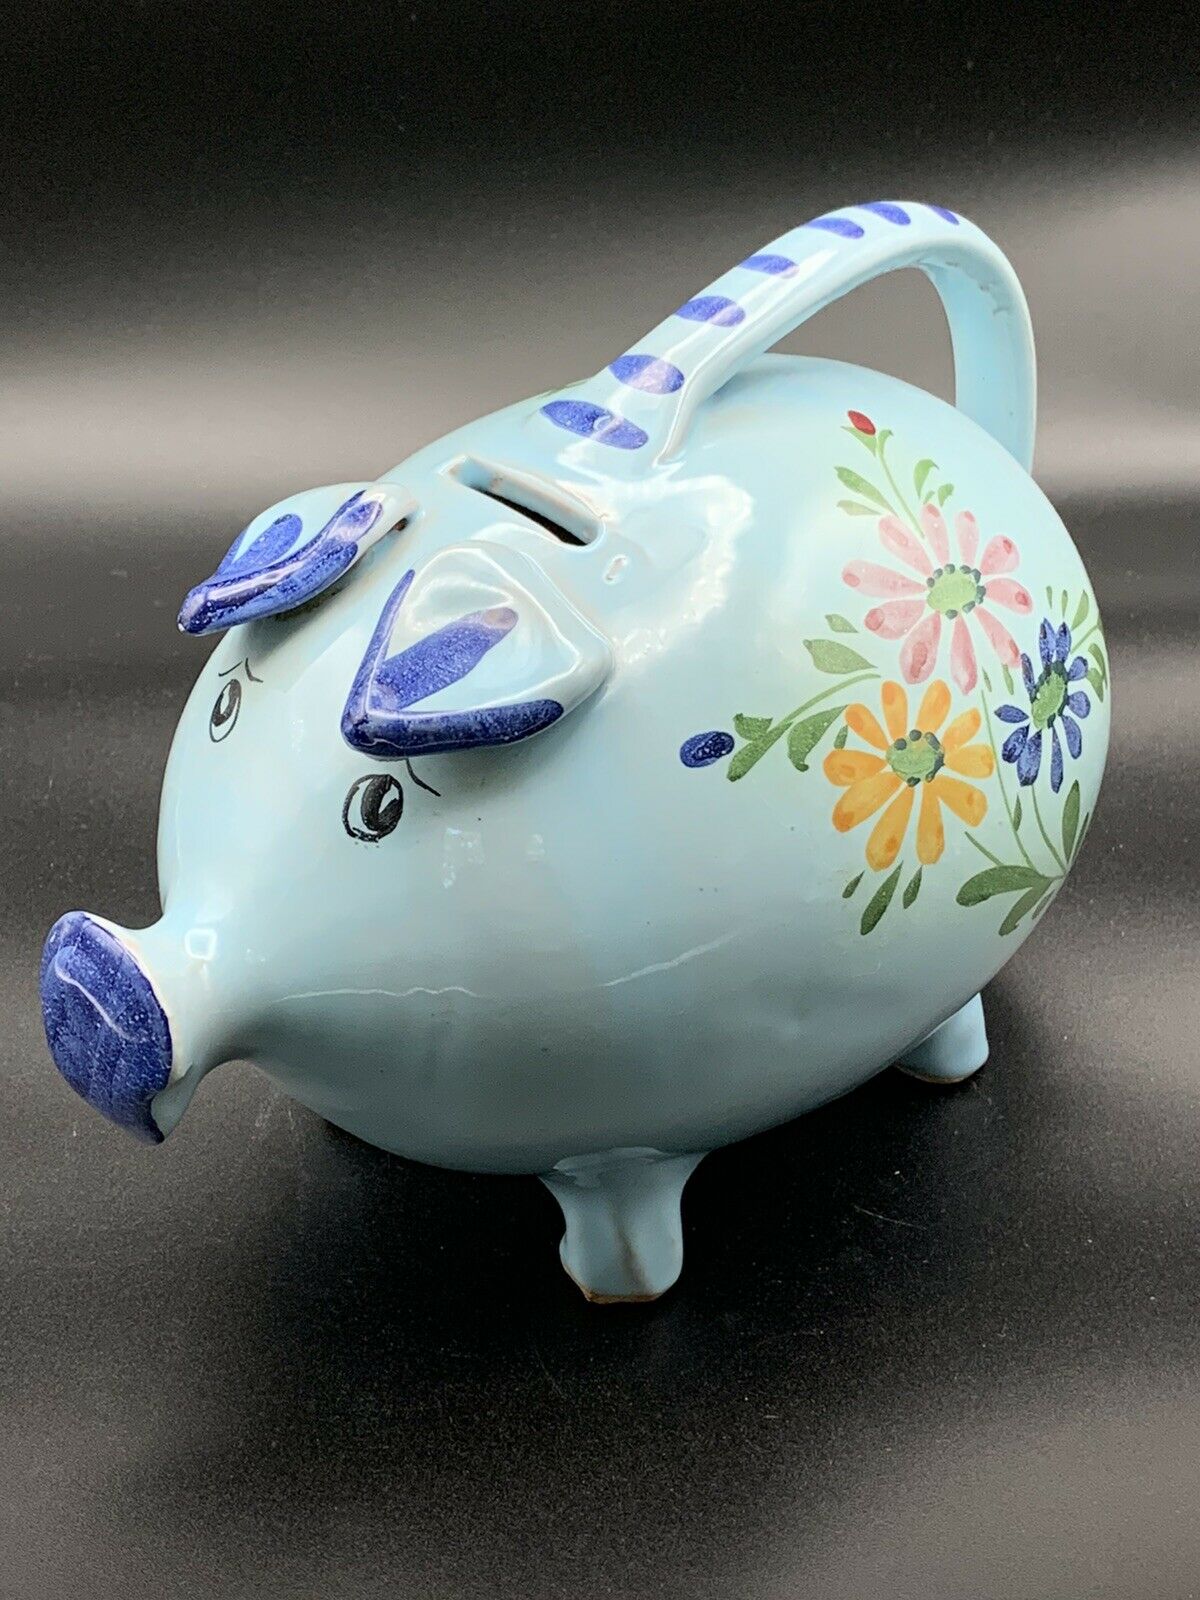 Vintage Large Ceramic Piggy Bank With Flower Design Made In Italy